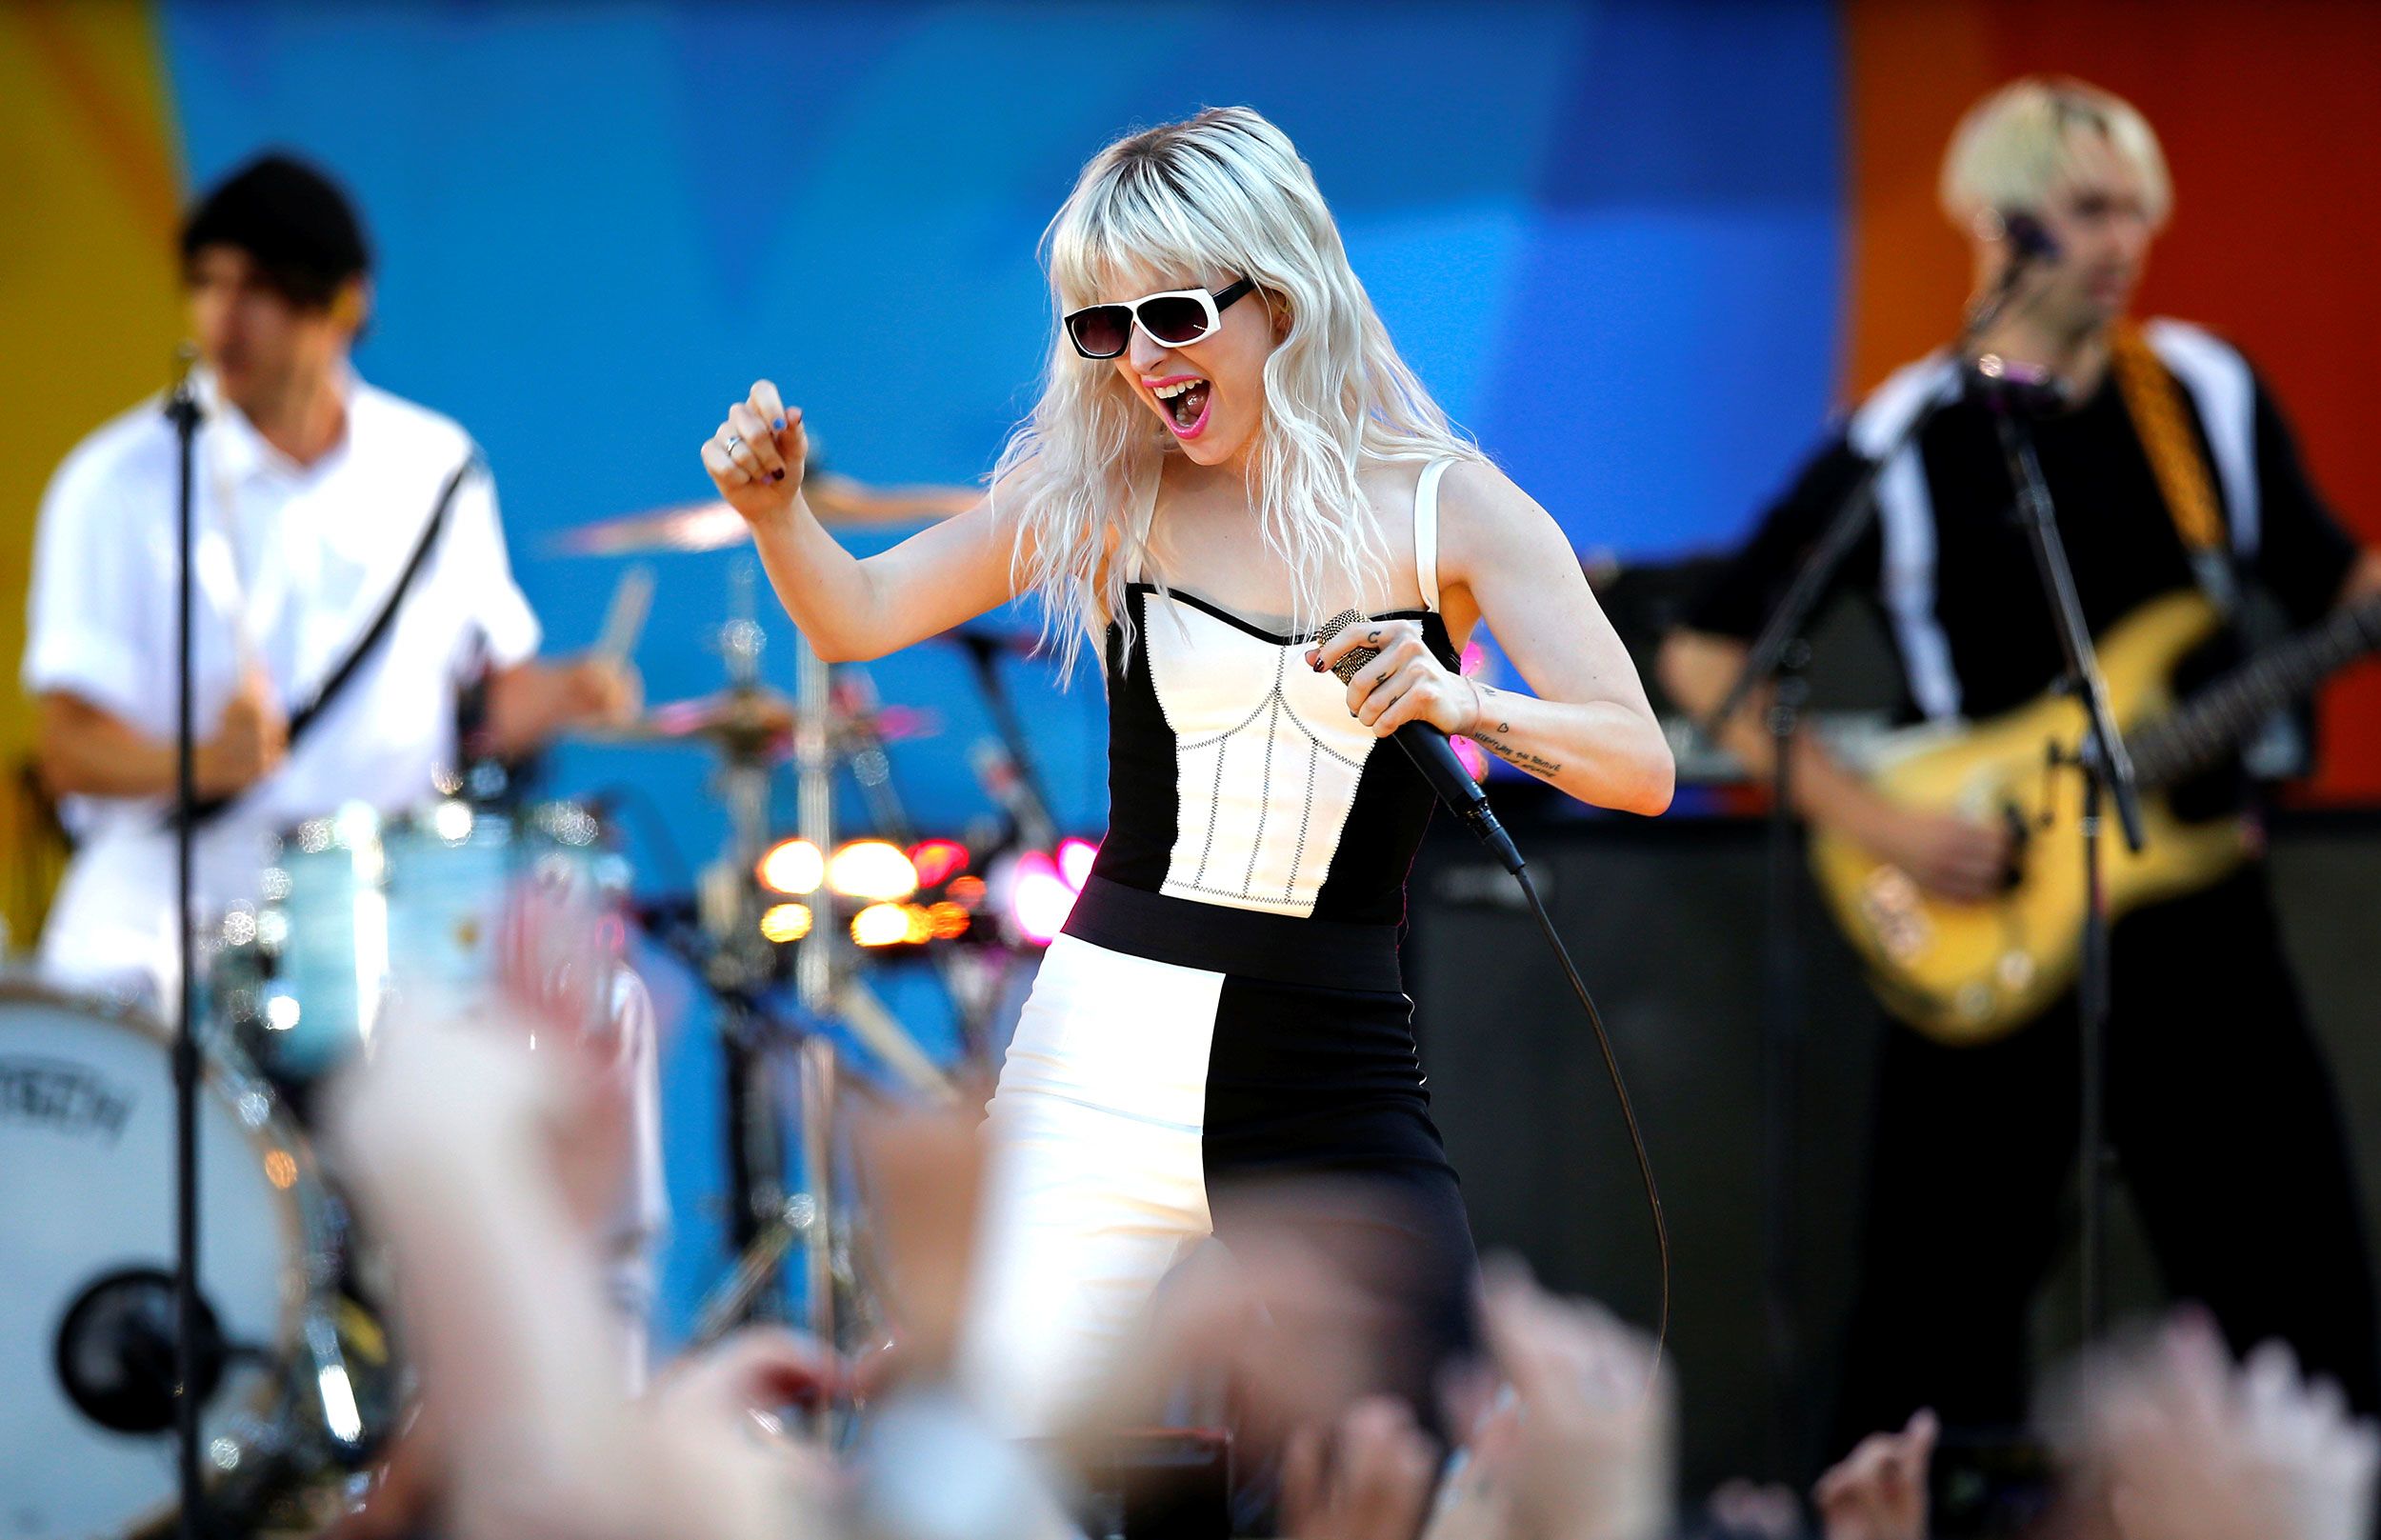 Paramore plays 'Misery Business' again after retiring it due to lyrics  controversy